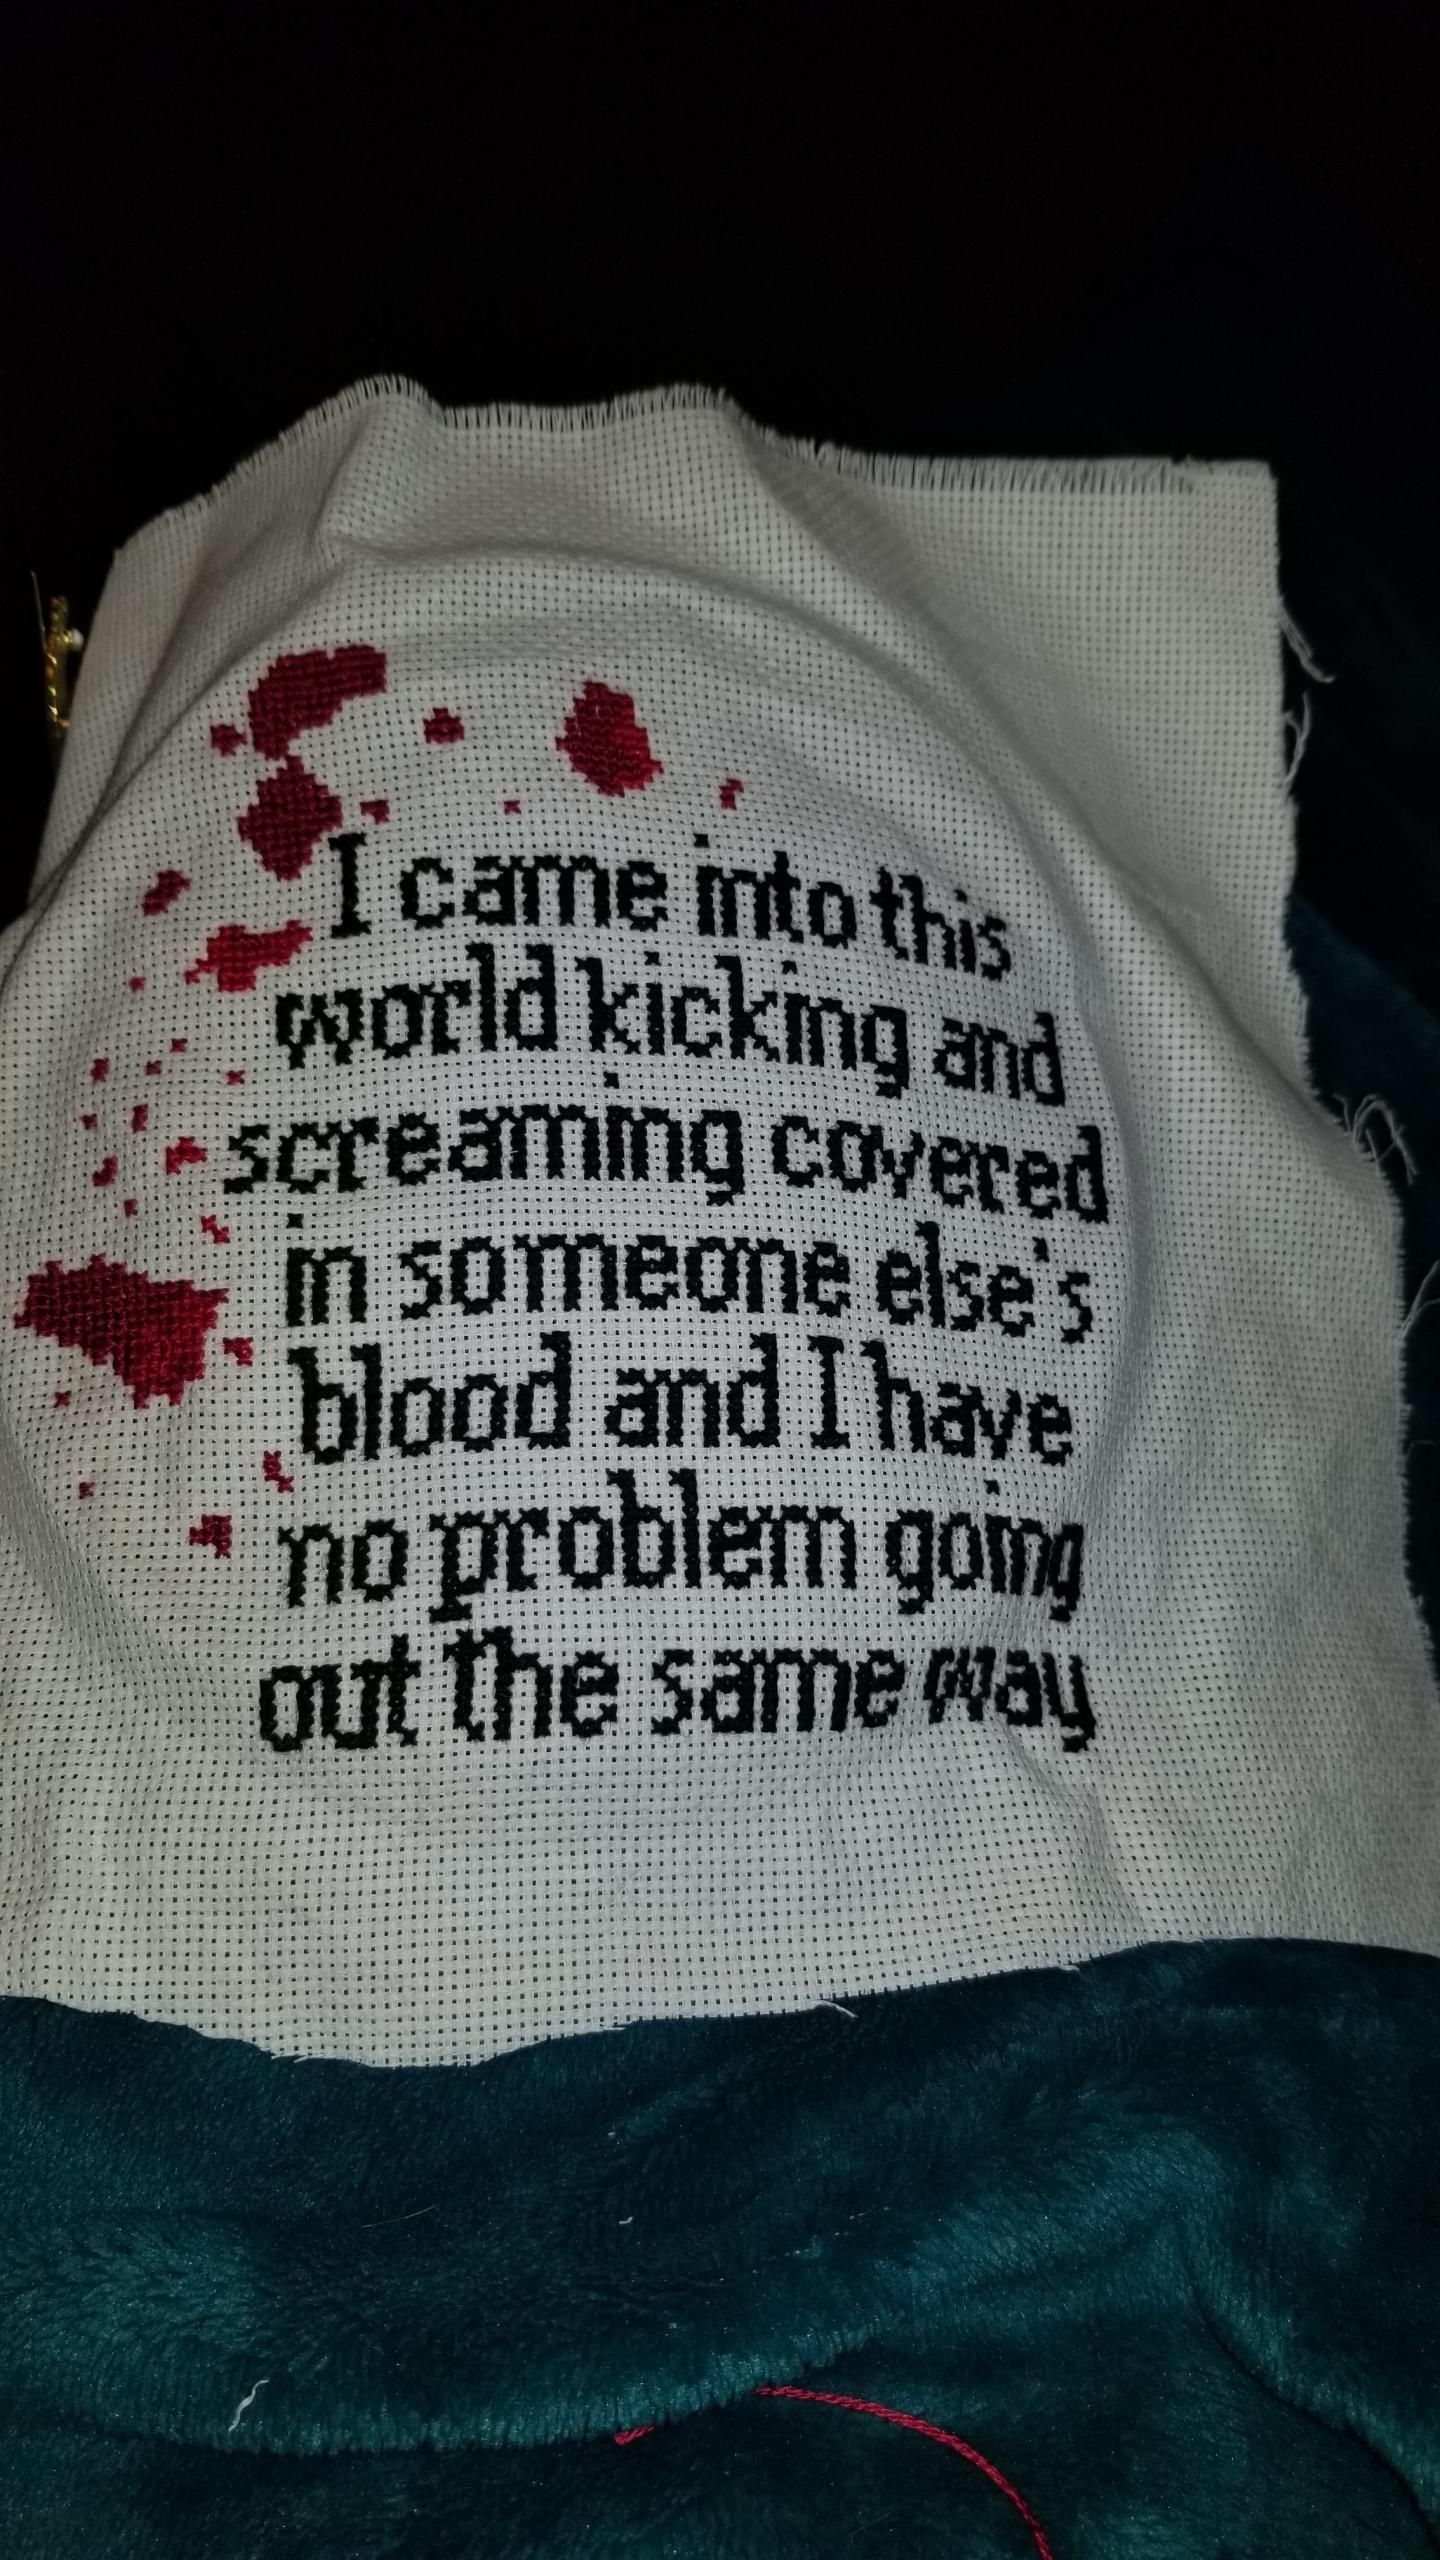 Found Granny stitching this, should I be worried?